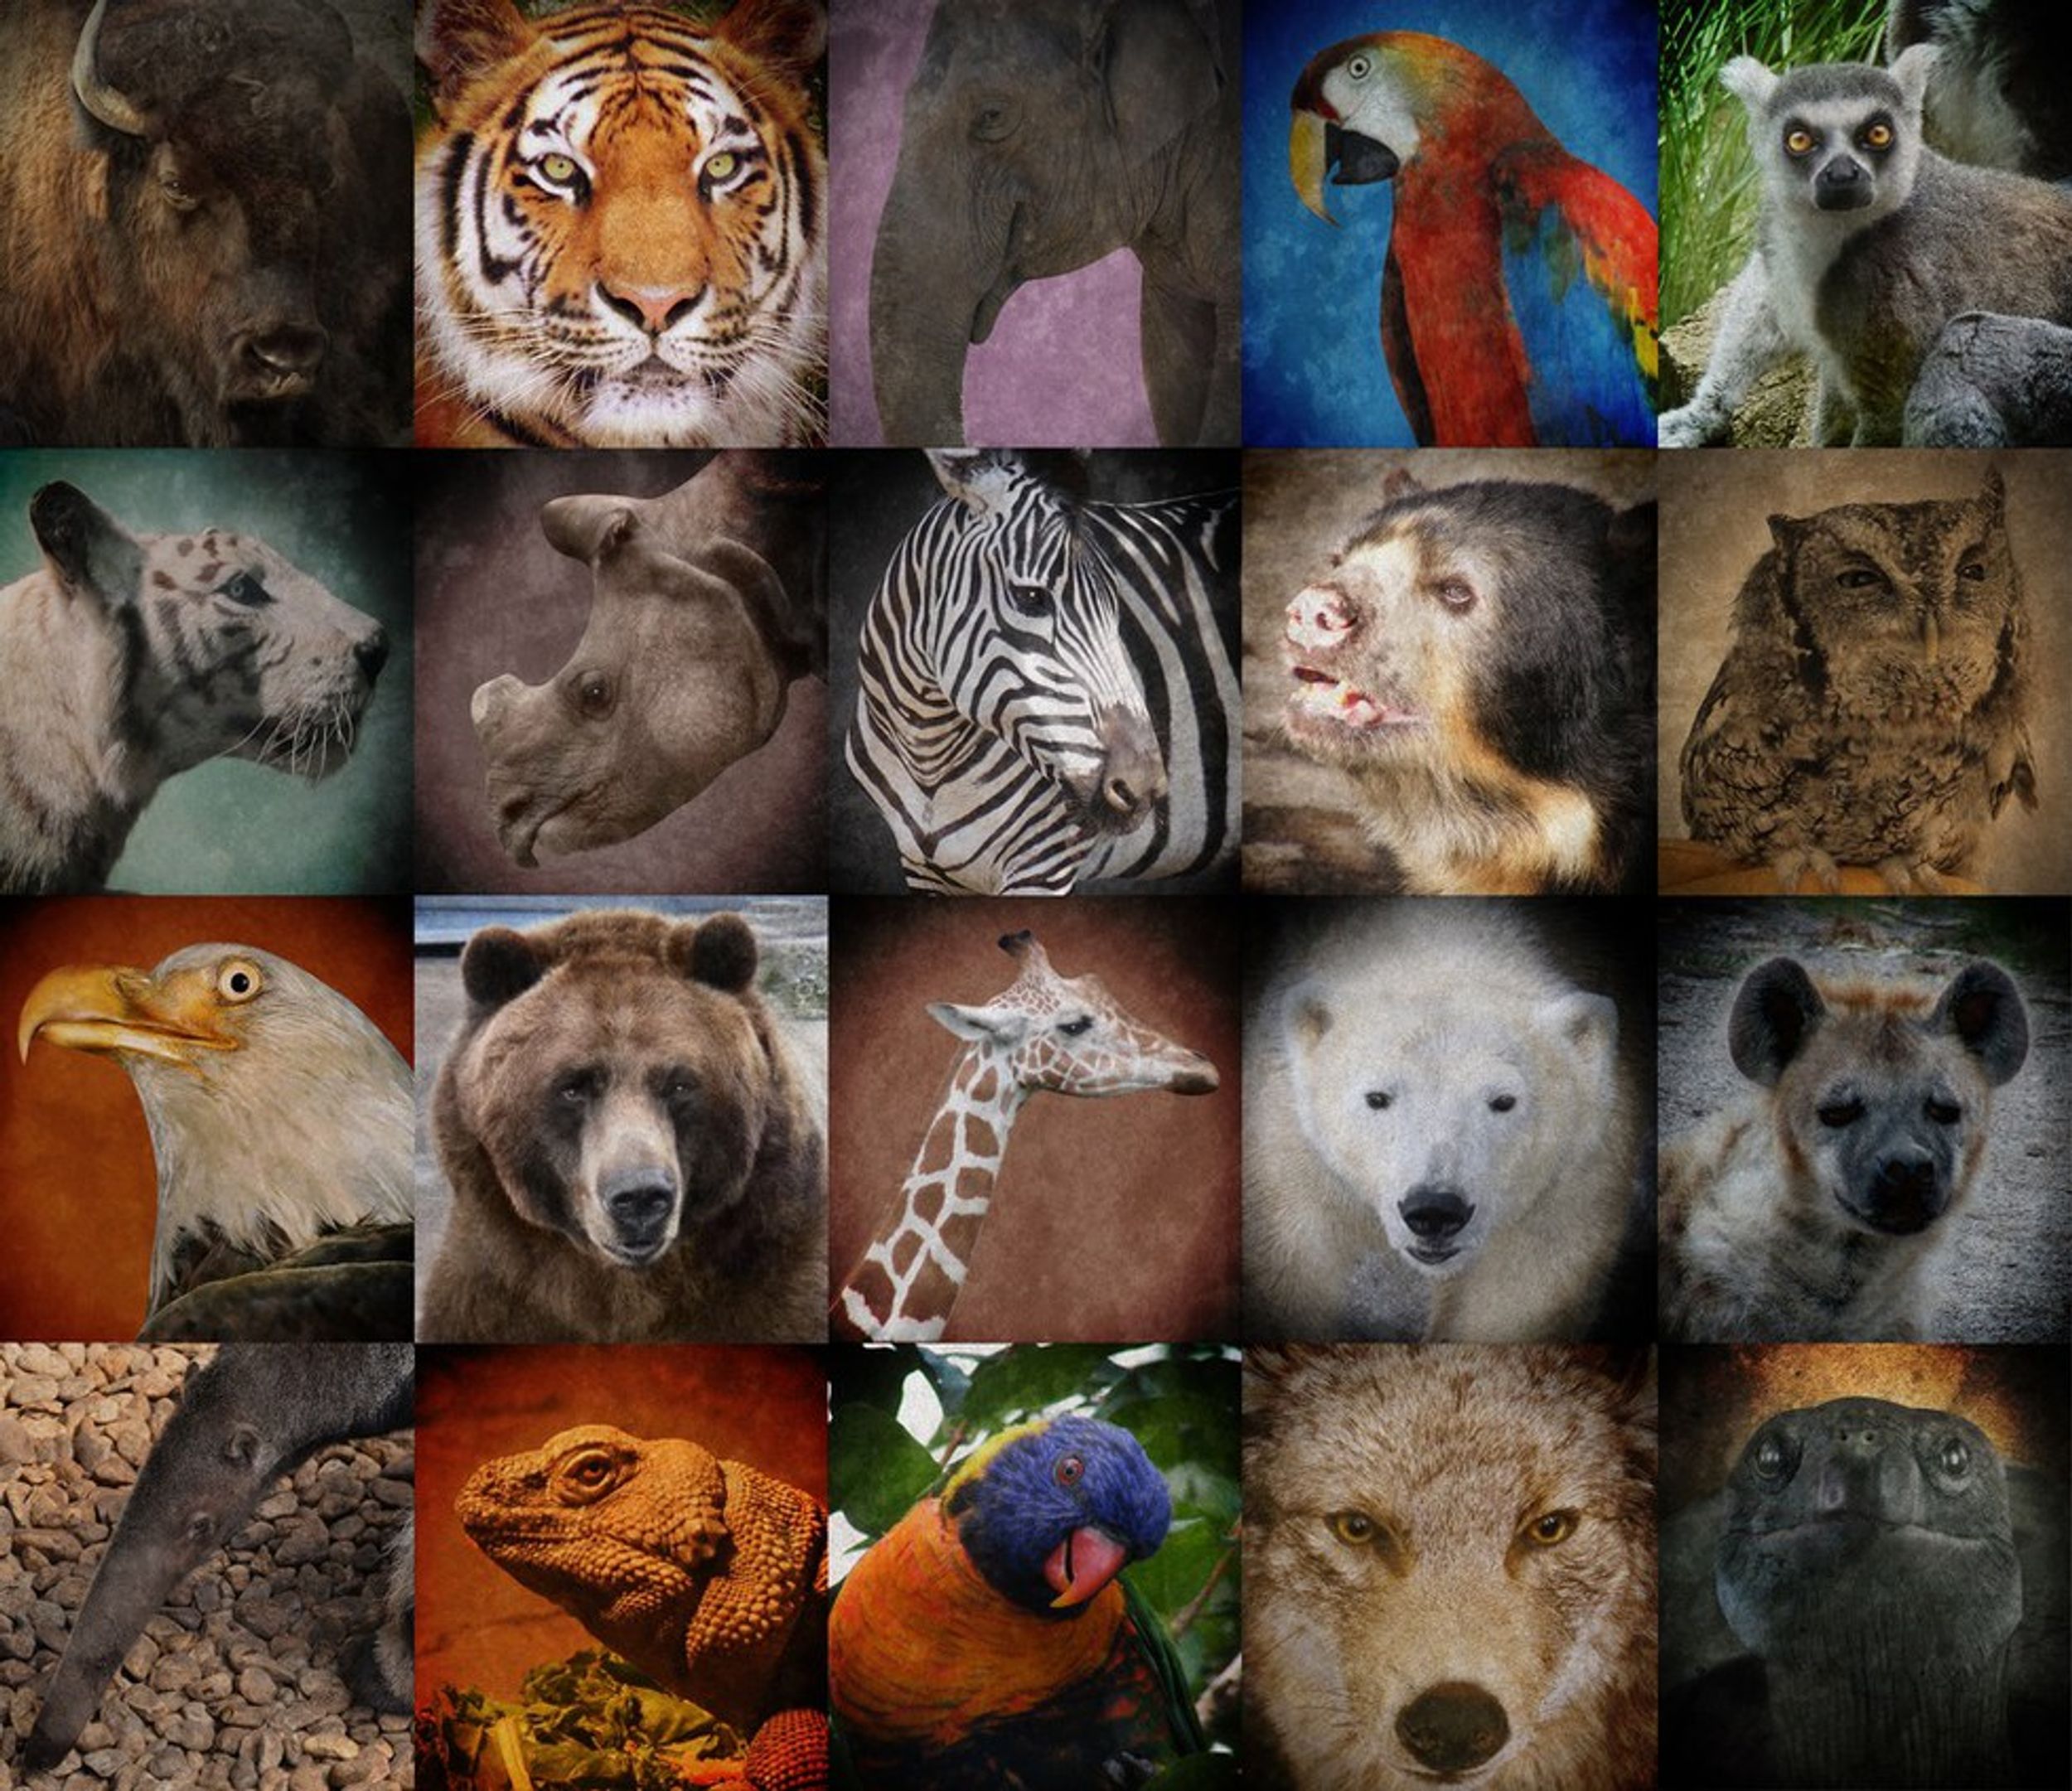 Let's Talk About Endangered Animals